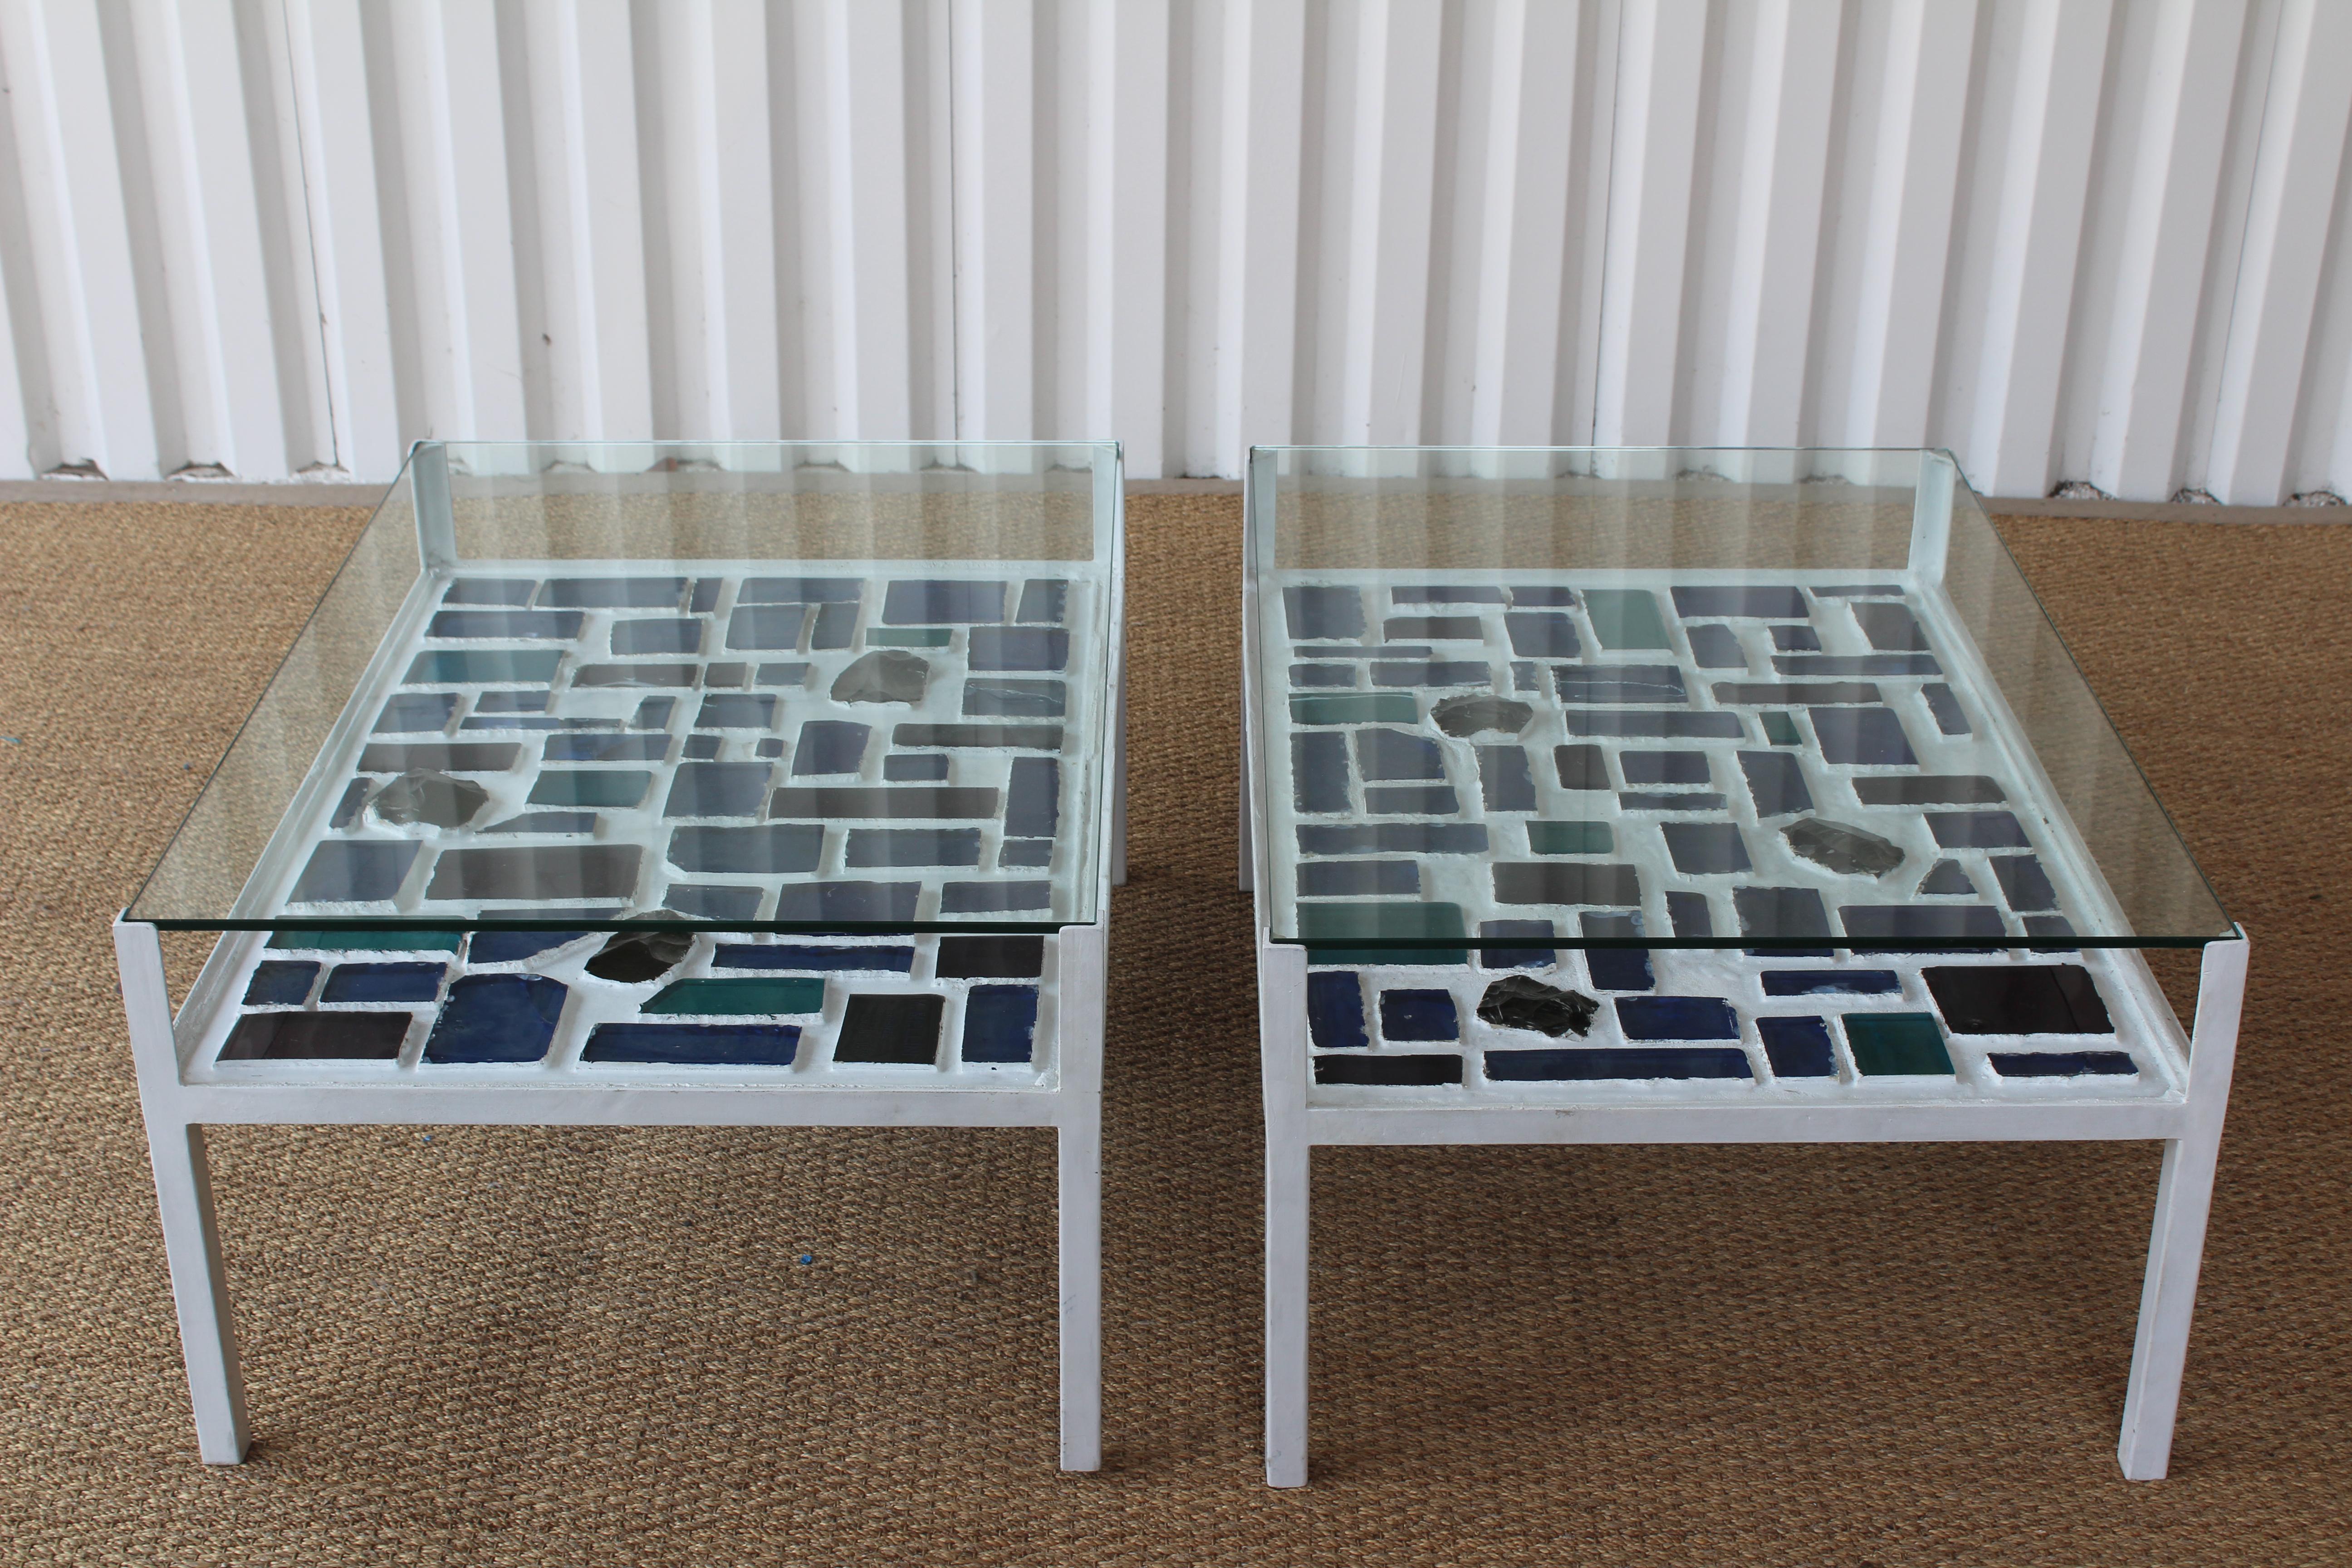 Pair of Mosaic Steel and Glass Coffee Tables by M. Mellini, Italy, 1974 For Sale 5